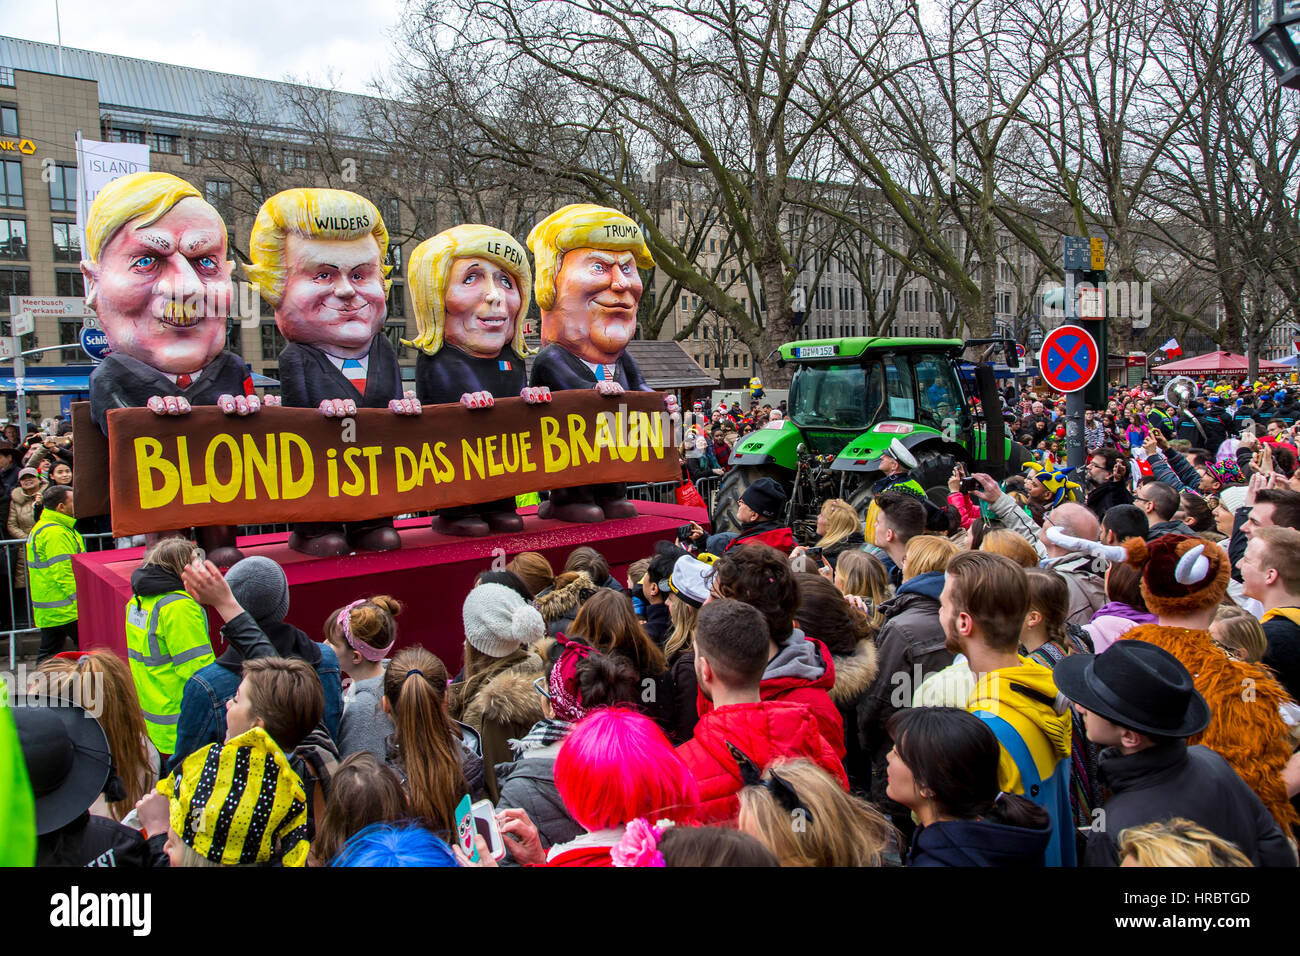 German Carnival parade in DŸsseldorf, Carnival floats designed as political caricatures, Blond is the new Brown, showing right wing politician, Adolf  Stock Photo